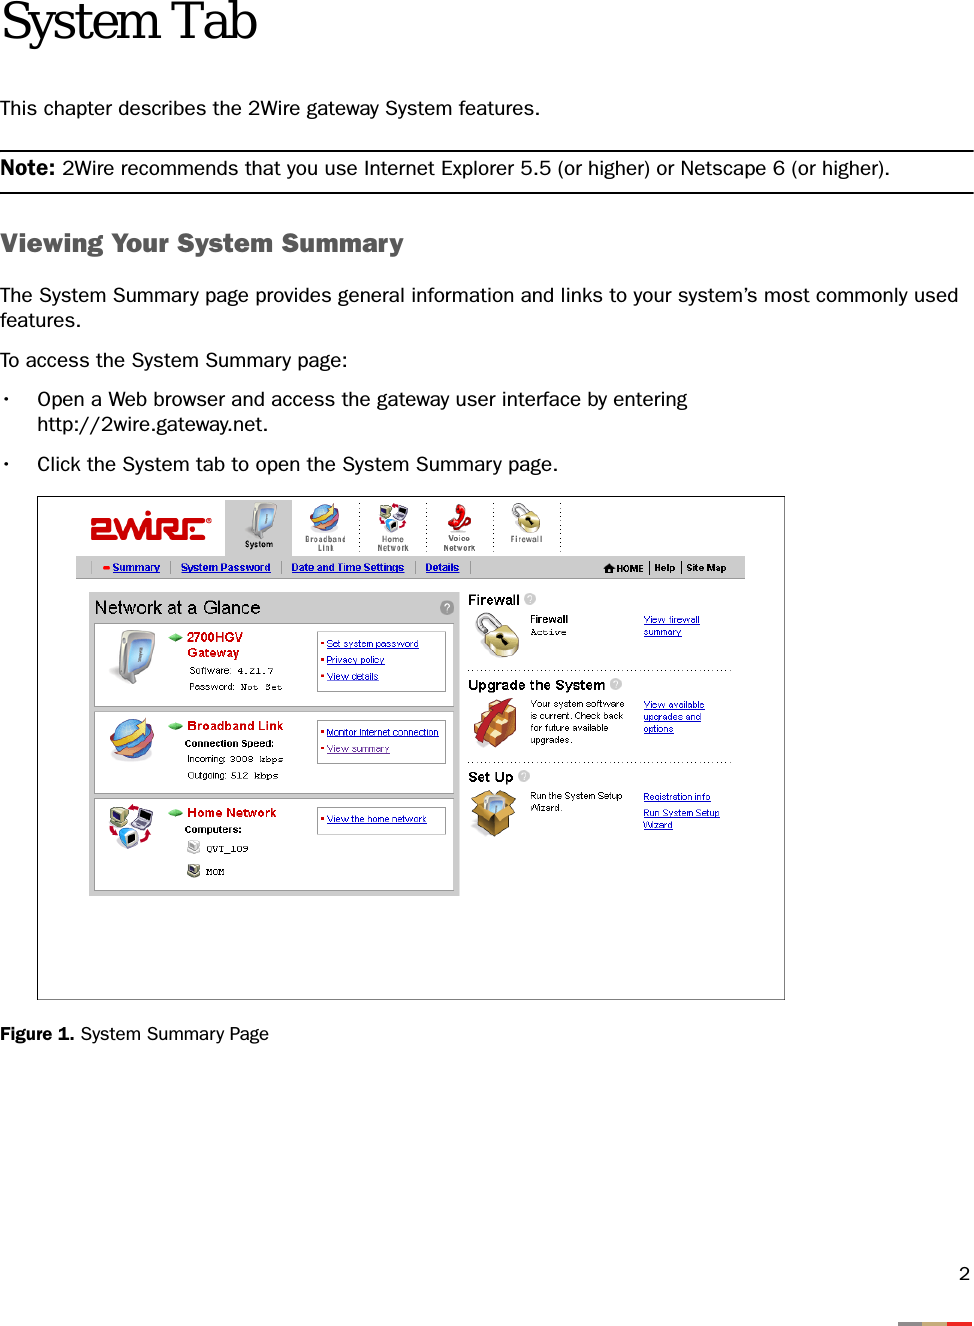 2System TabThis chapter describes the 2Wire gateway System features.Note: 2Wire recommends that you use Internet Explorer 5.5 (or higher) or Netscape 6 (or higher).Viewing Your System SummaryThe System Summary page provides general information and links to your system’s most commonly used features. To access the System Summary page:• Open a Web browser and access the gateway user interface by enteringhttp://2wire.gateway.net.• Click the System tab to open the System Summary page.Figure 1. System Summary Page